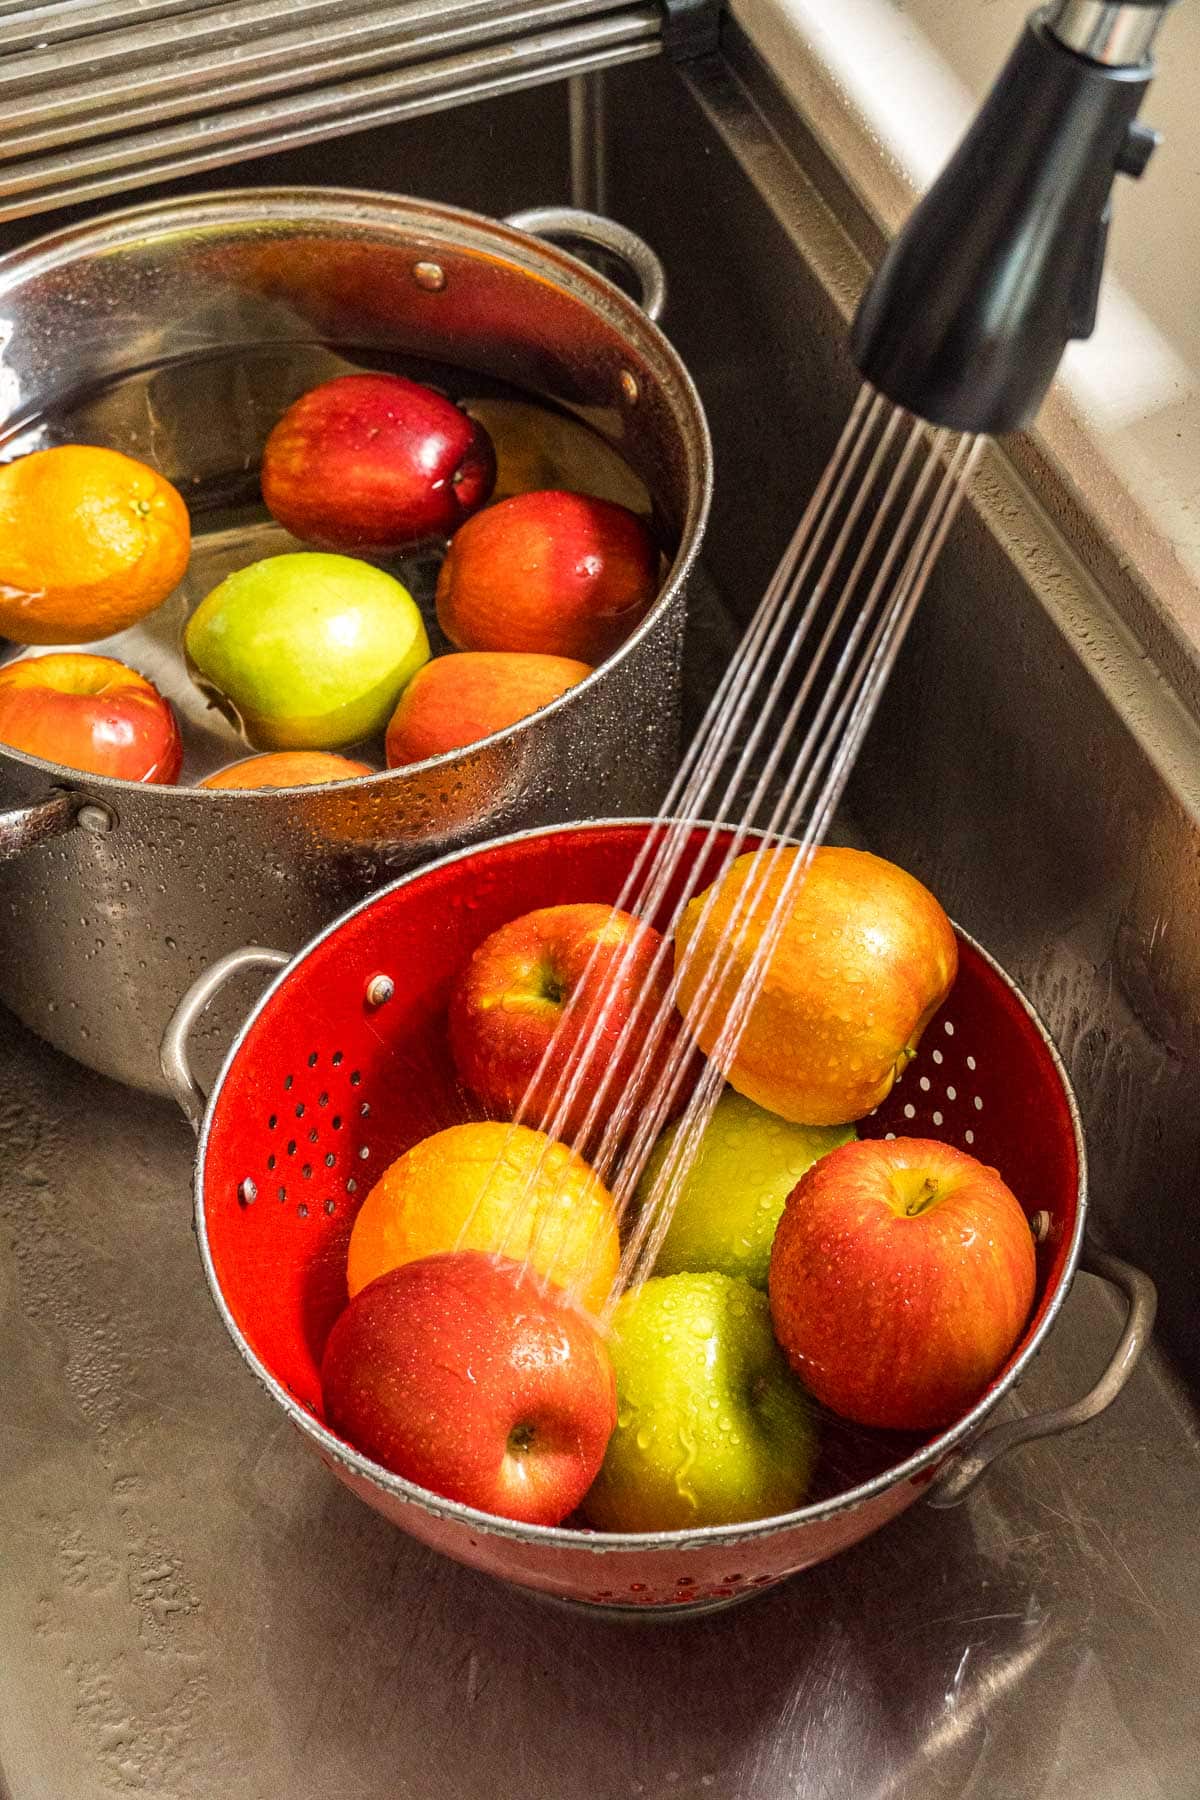 Washing apples in a red colander.